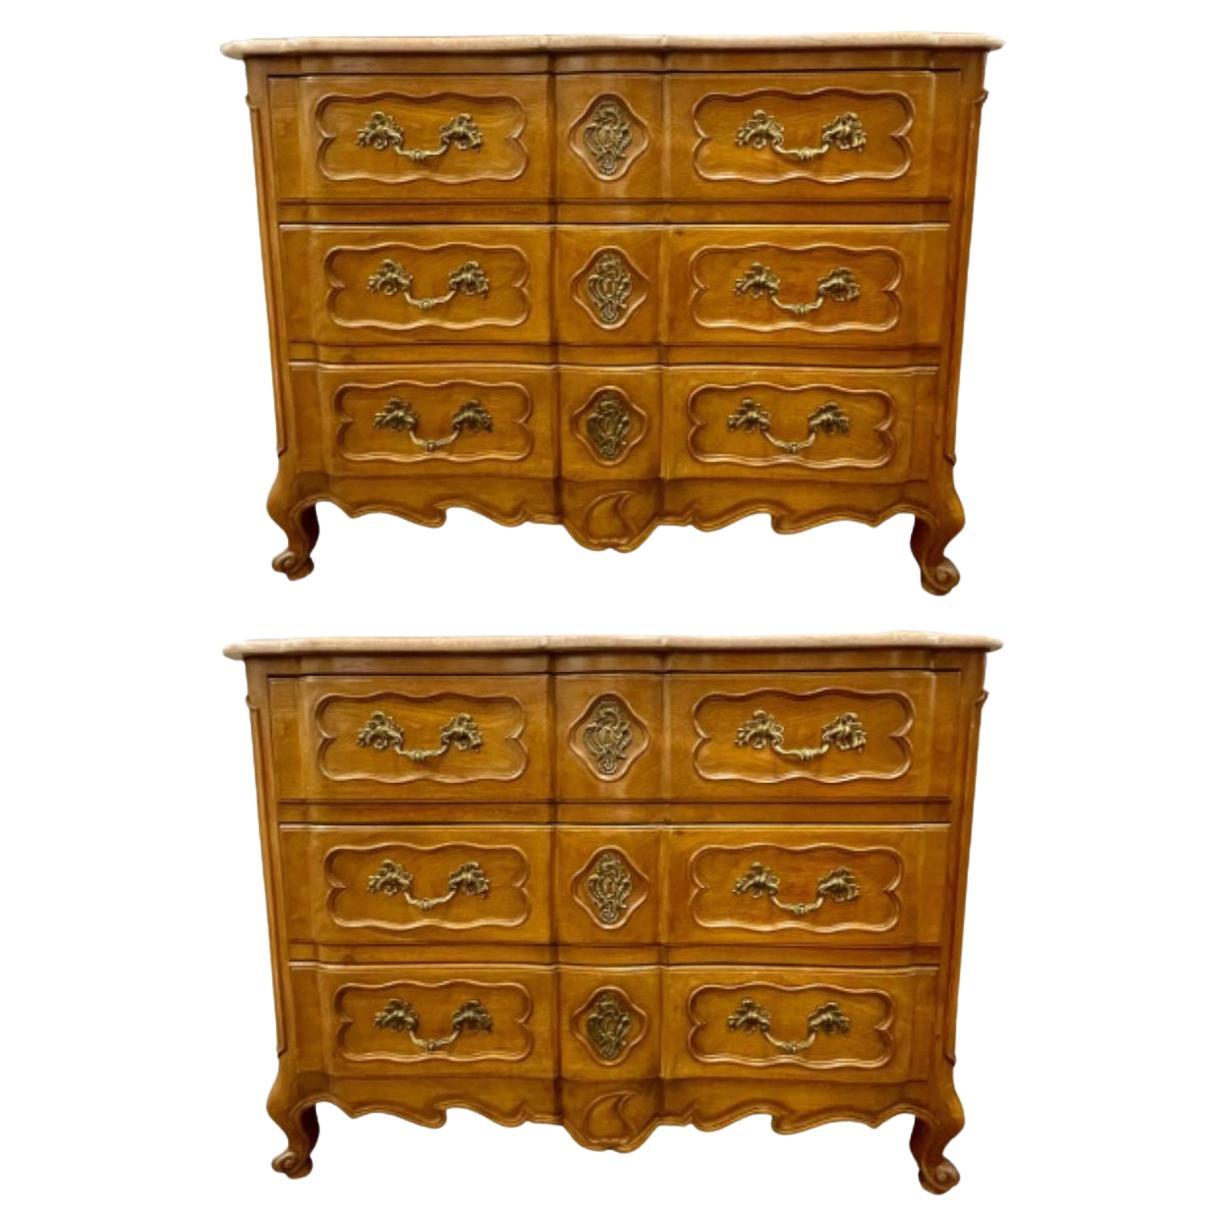 Pair of Marble-Top Louis XV Style Commodes Chests Attributed to Maison Jansen